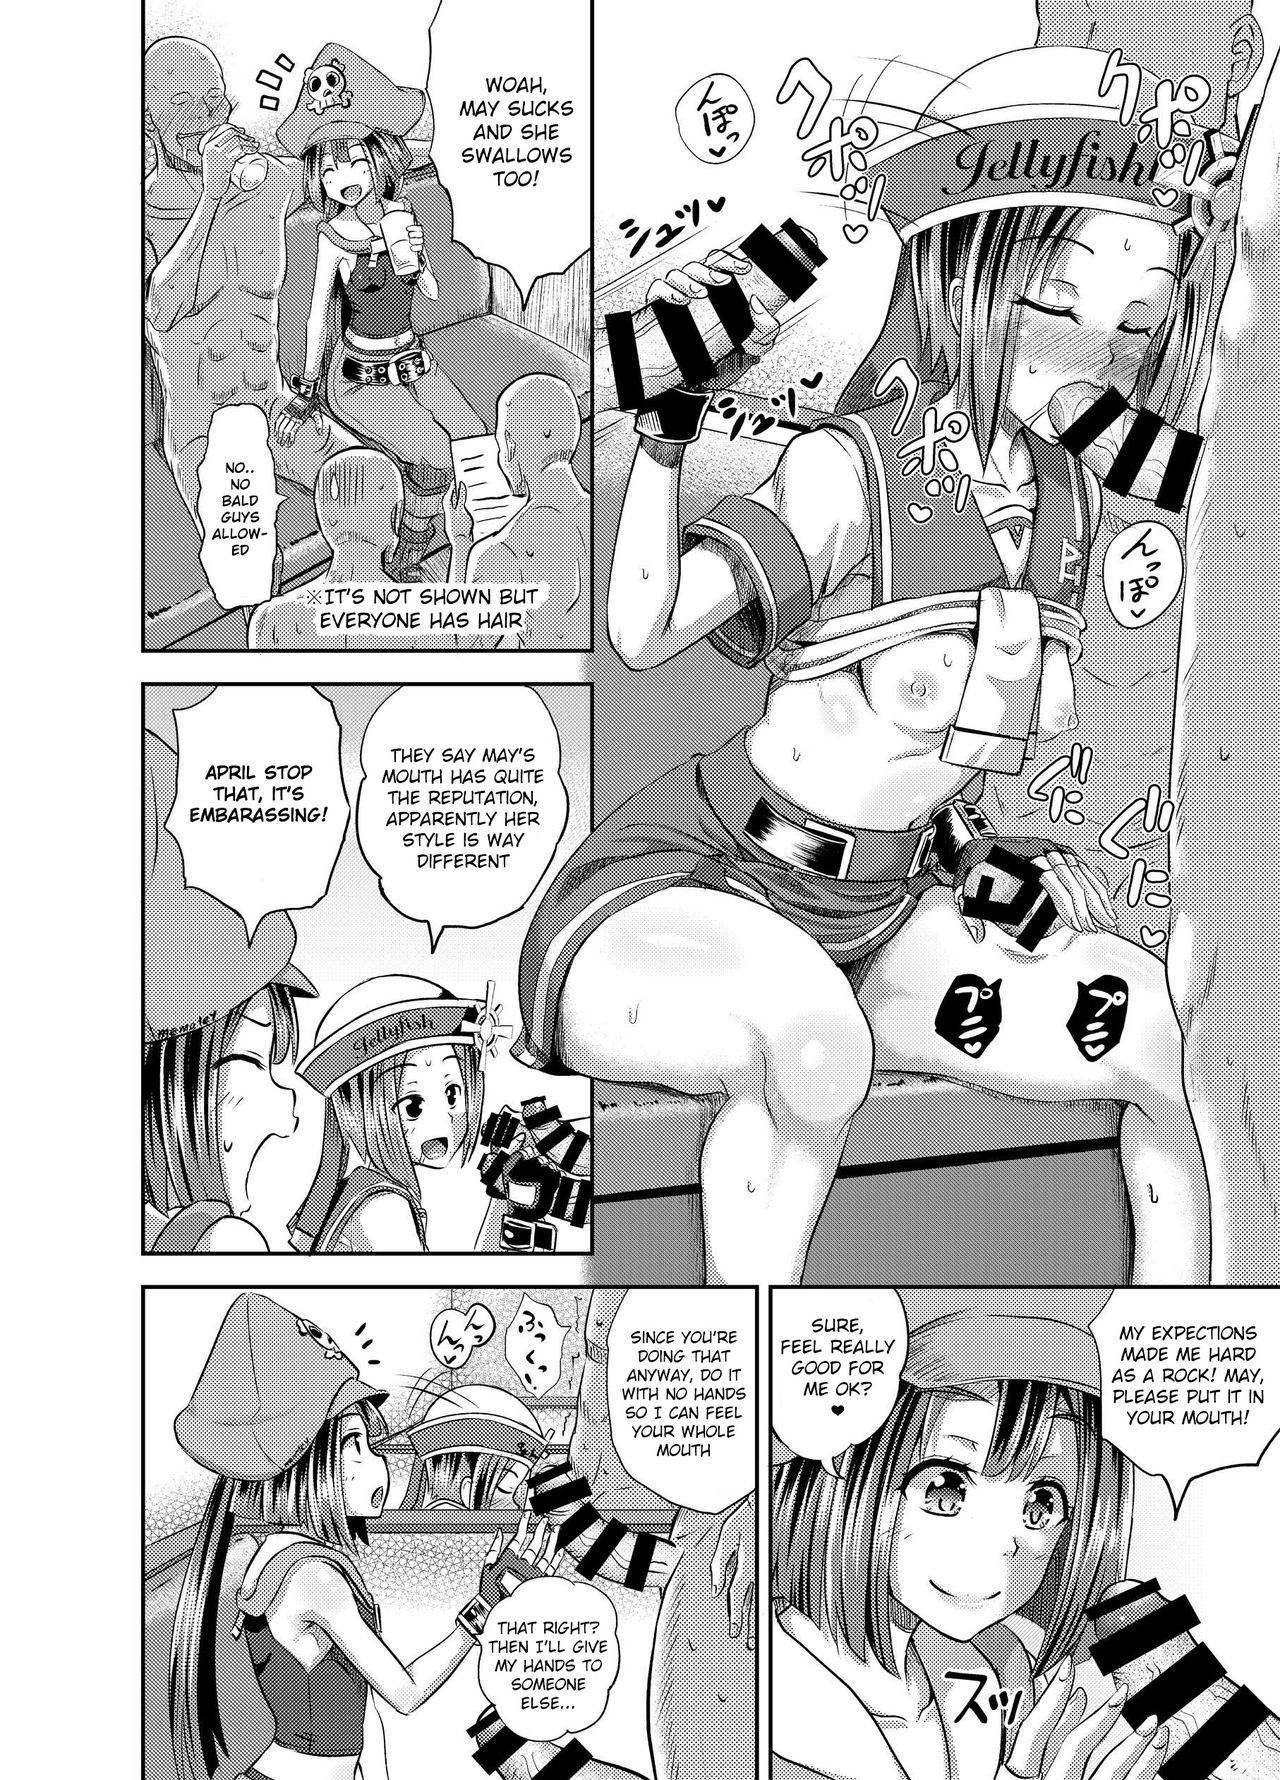 Latinas Jellyfish Kaizokudan e Youkoso! | Welcome to The Jellyfish Pleasure Club! - Guilty gear Massive - Page 5